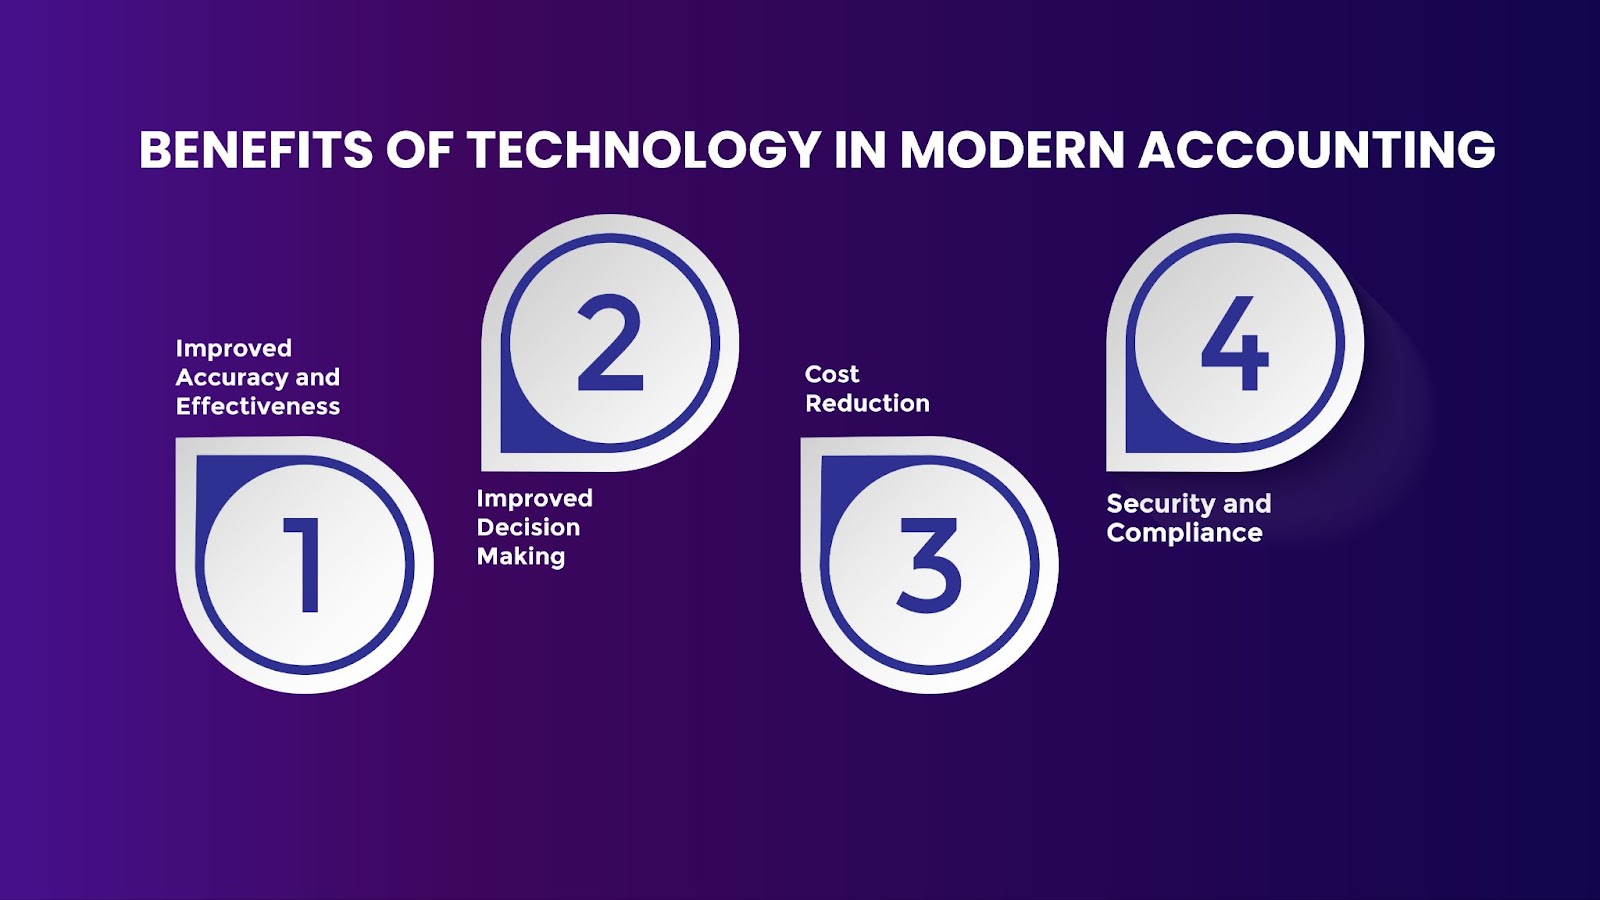 Benefits of Technology in Modern Accounting